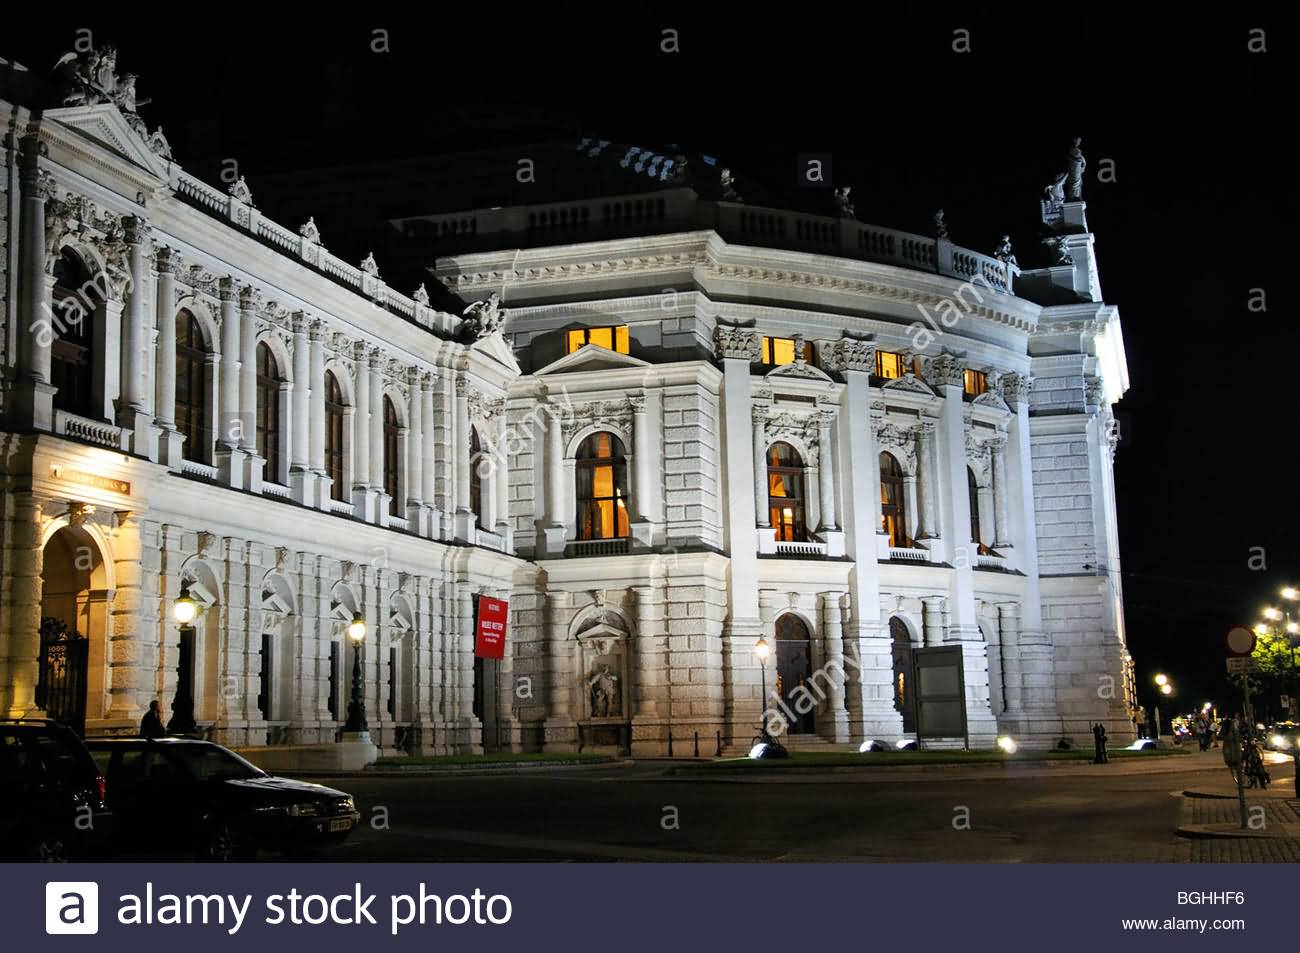 Side View Image Of The Burgtheater In Vienna, Austria At Night